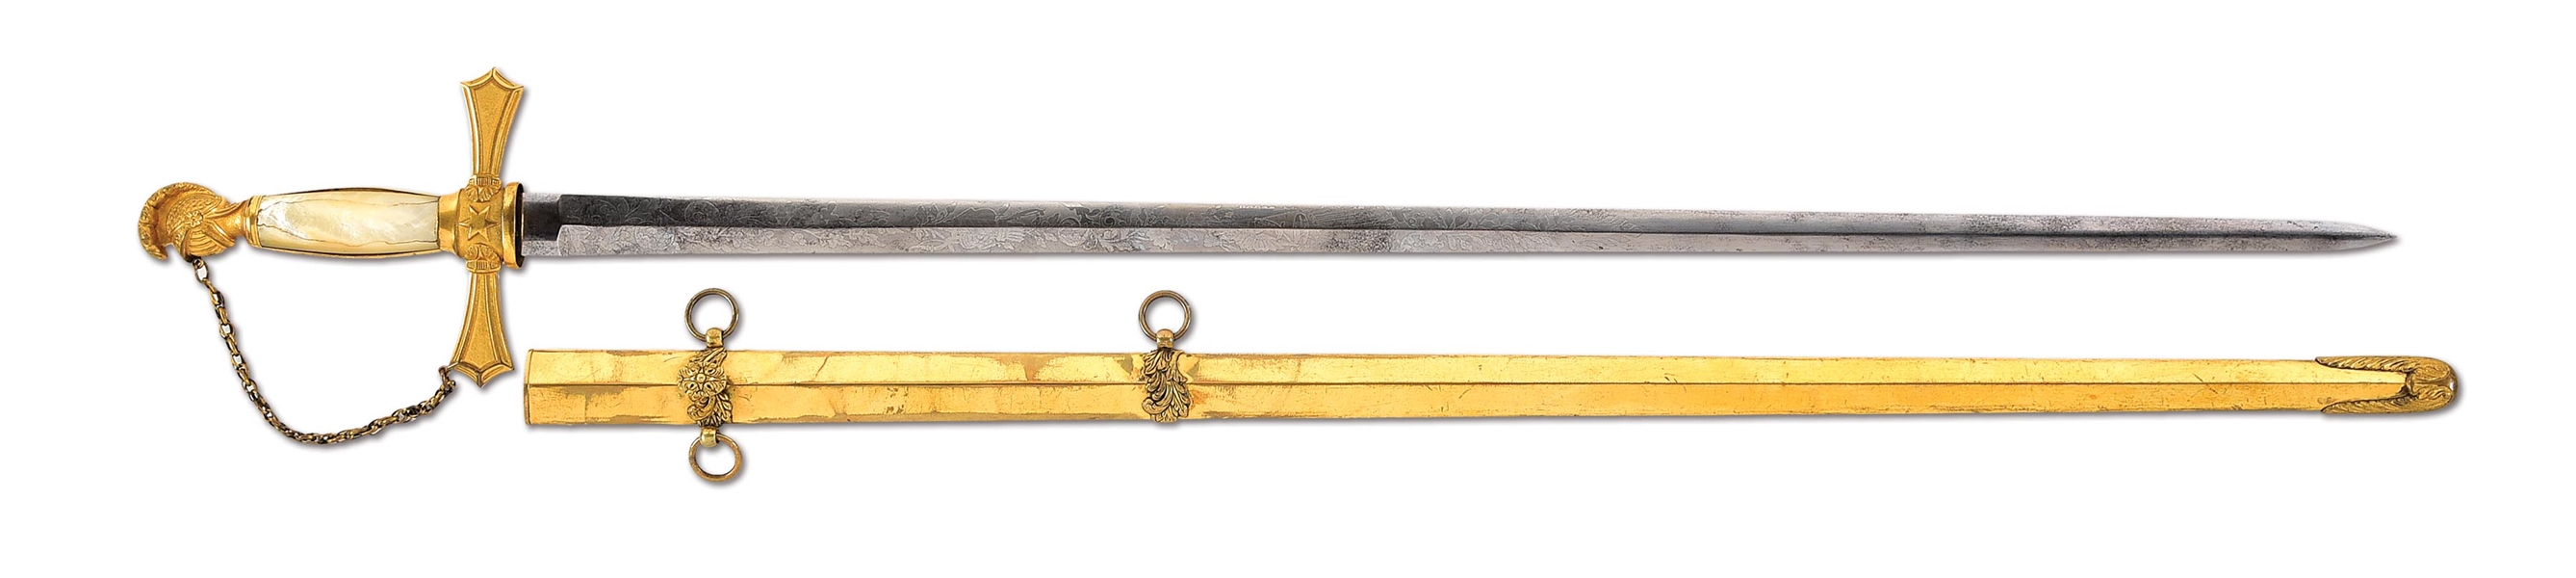 AMES 1840 MILITIA OFFICERS SWORD WITH PEARL GRIPS.